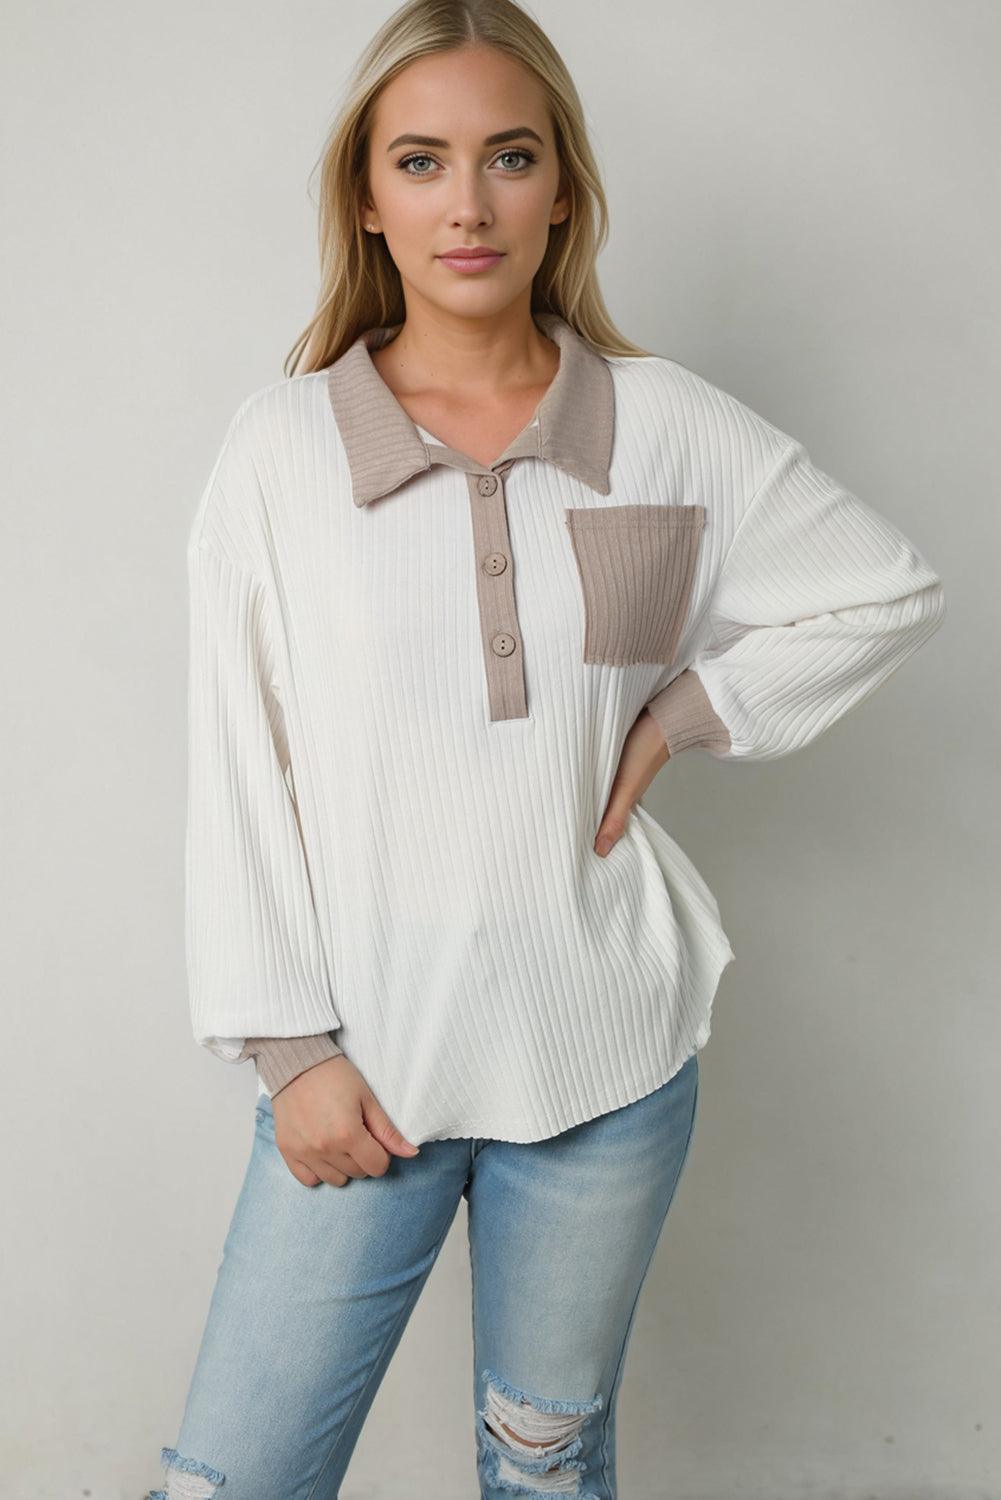 White Contrast Trim Buttons Collared Neck Ribbed Knit Top - L & M Kee, LLC